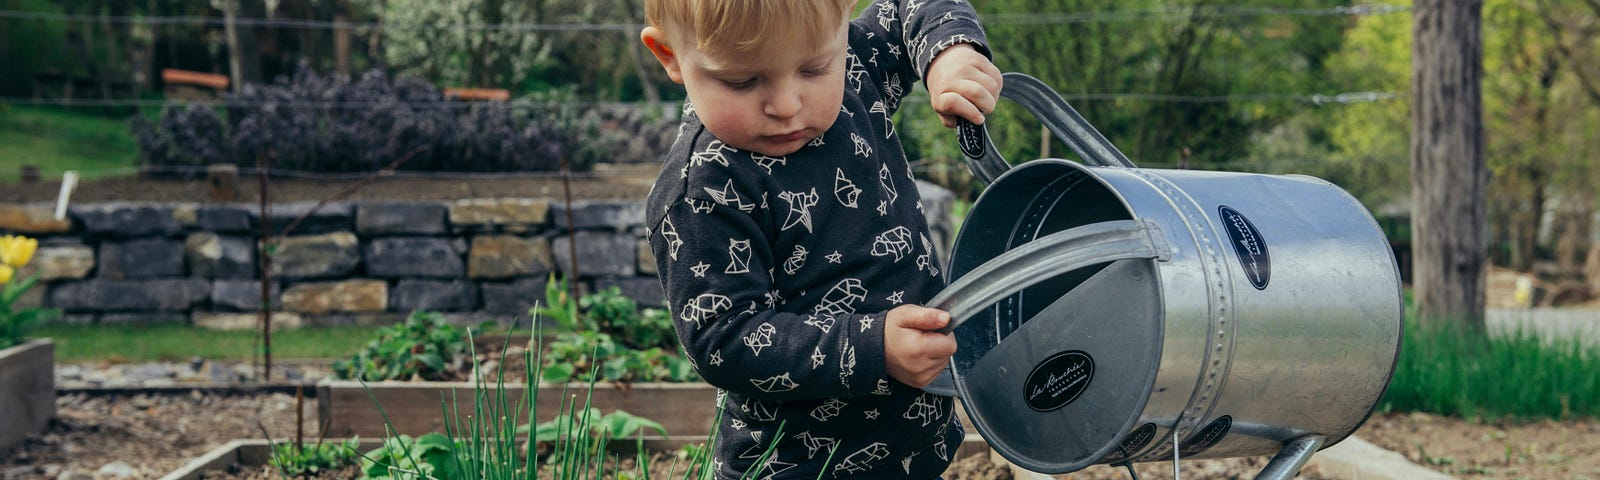 Here is a photo of a child watering in the garden, representing our need to plant things that will yield personal growth and transformation in our lives.